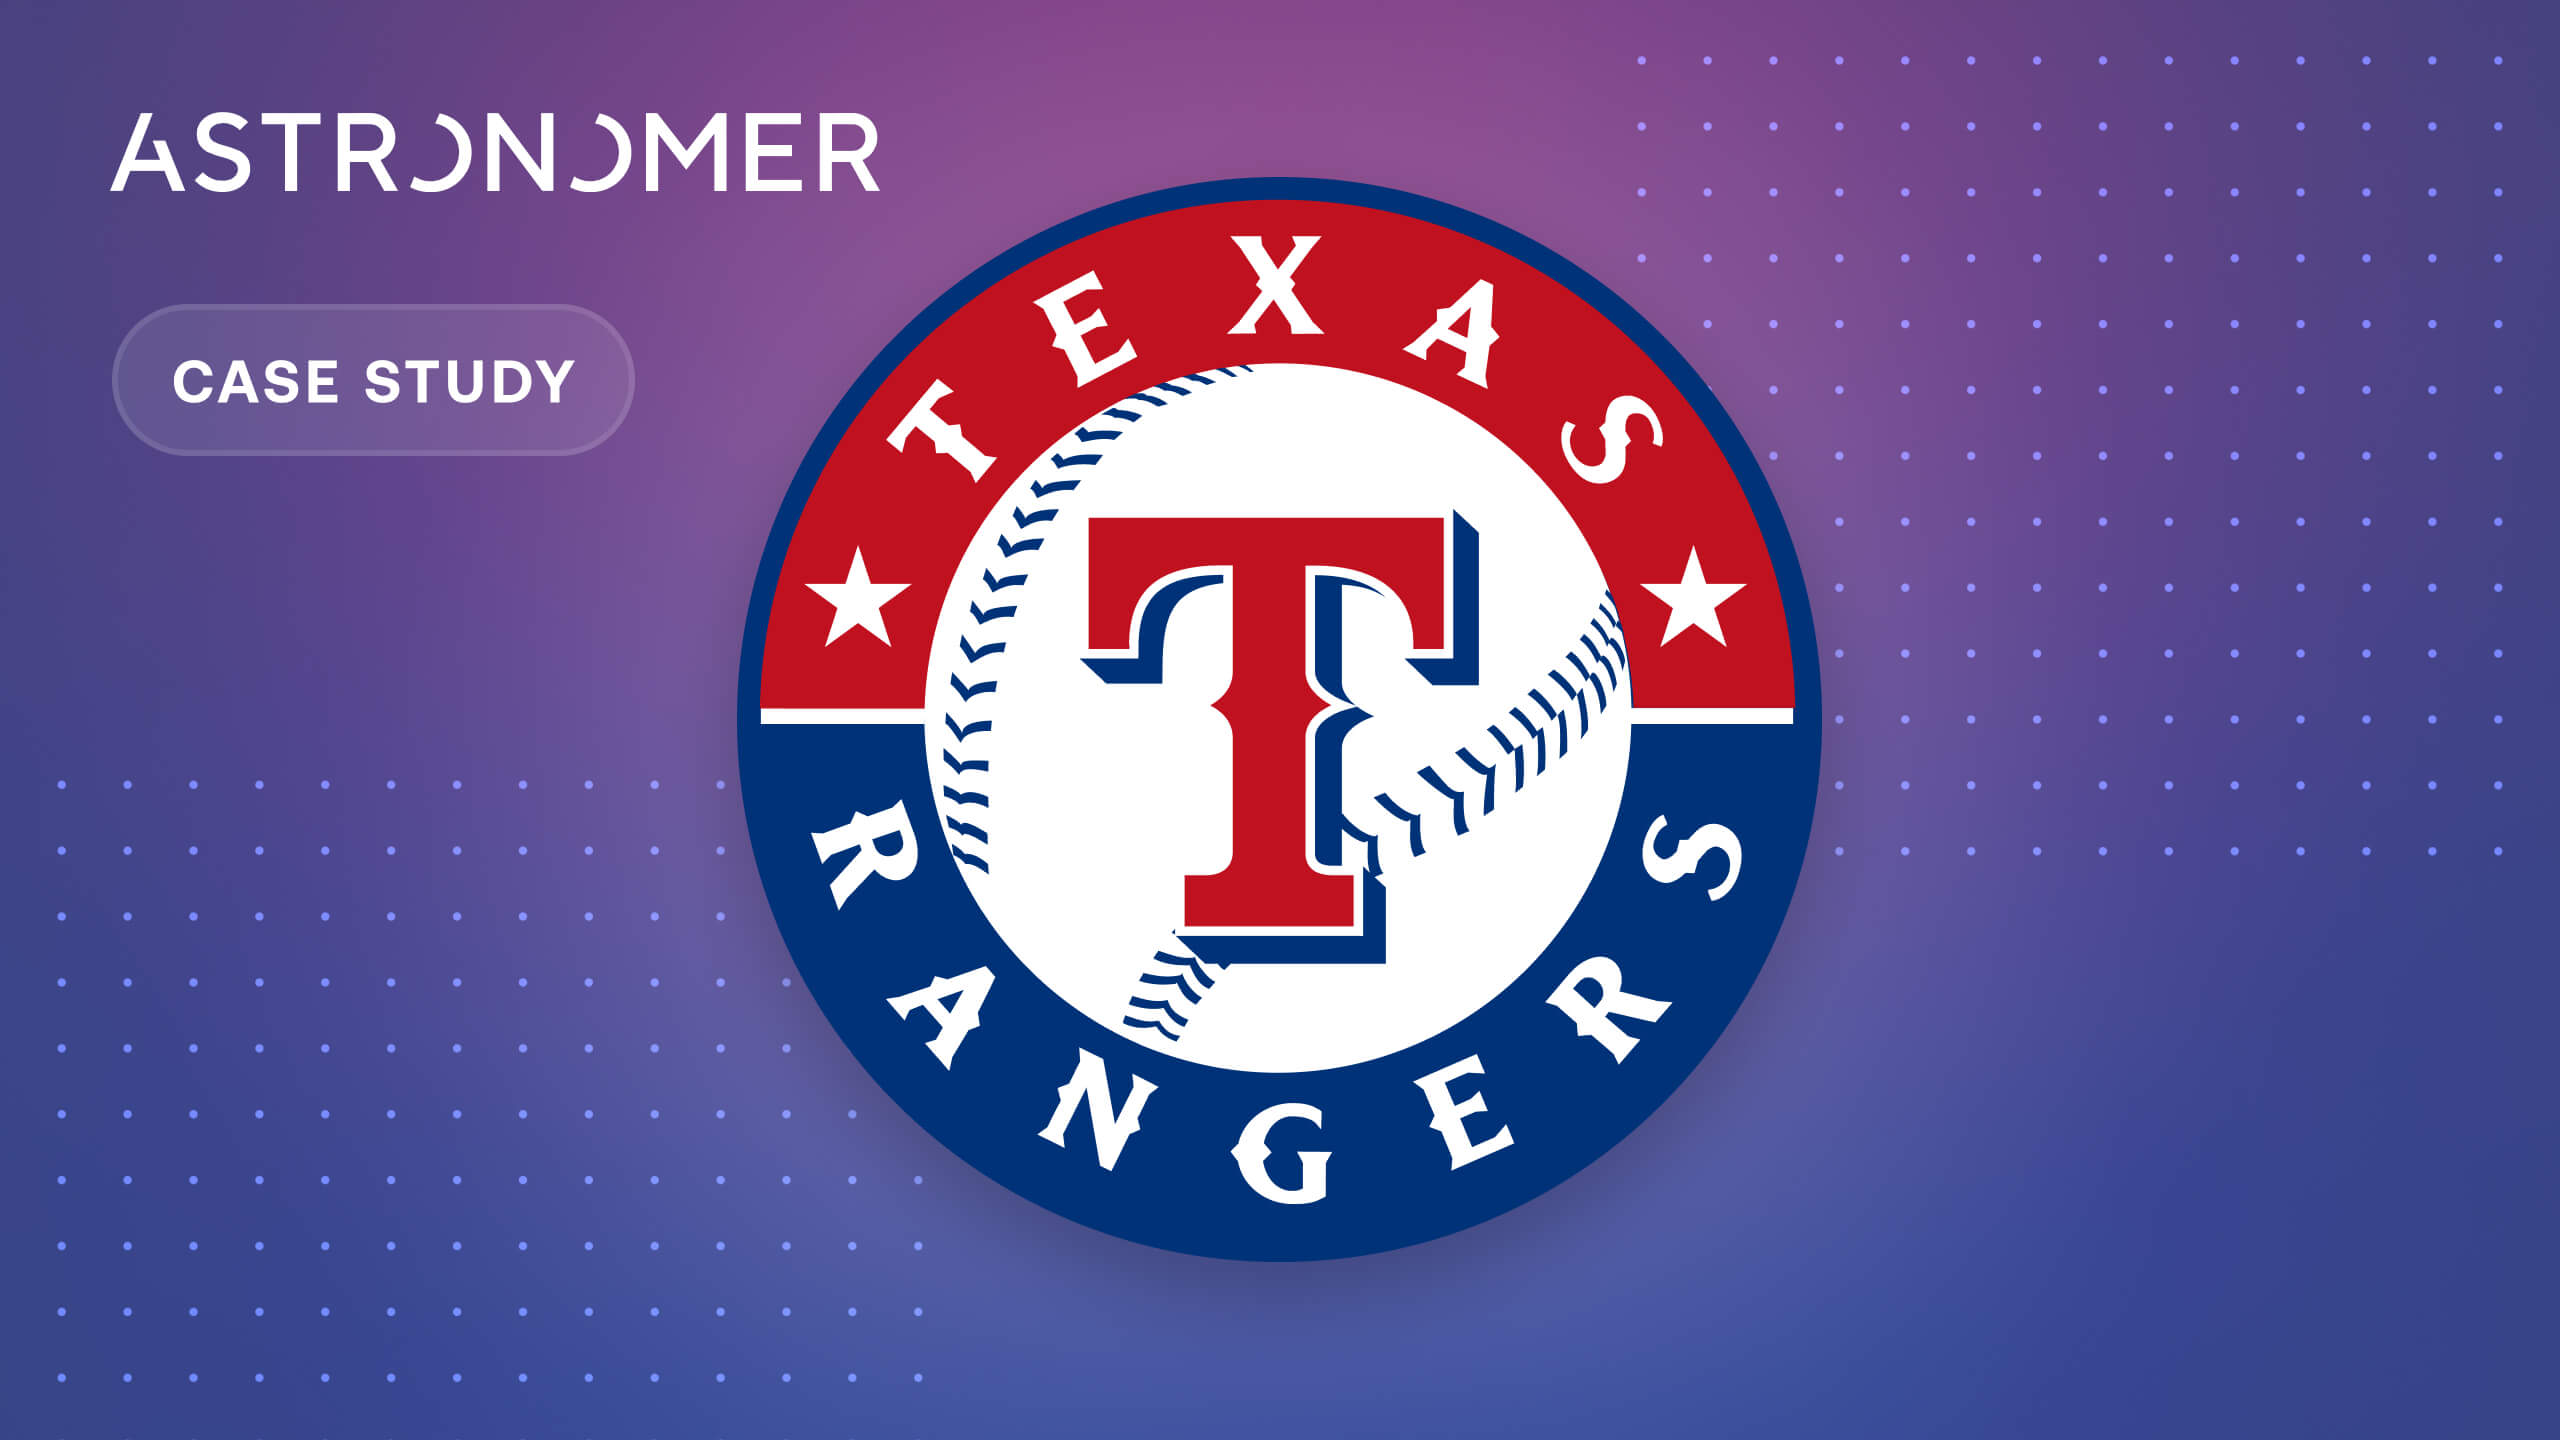 The Texas Rangers win baseball games with analytics on Astro